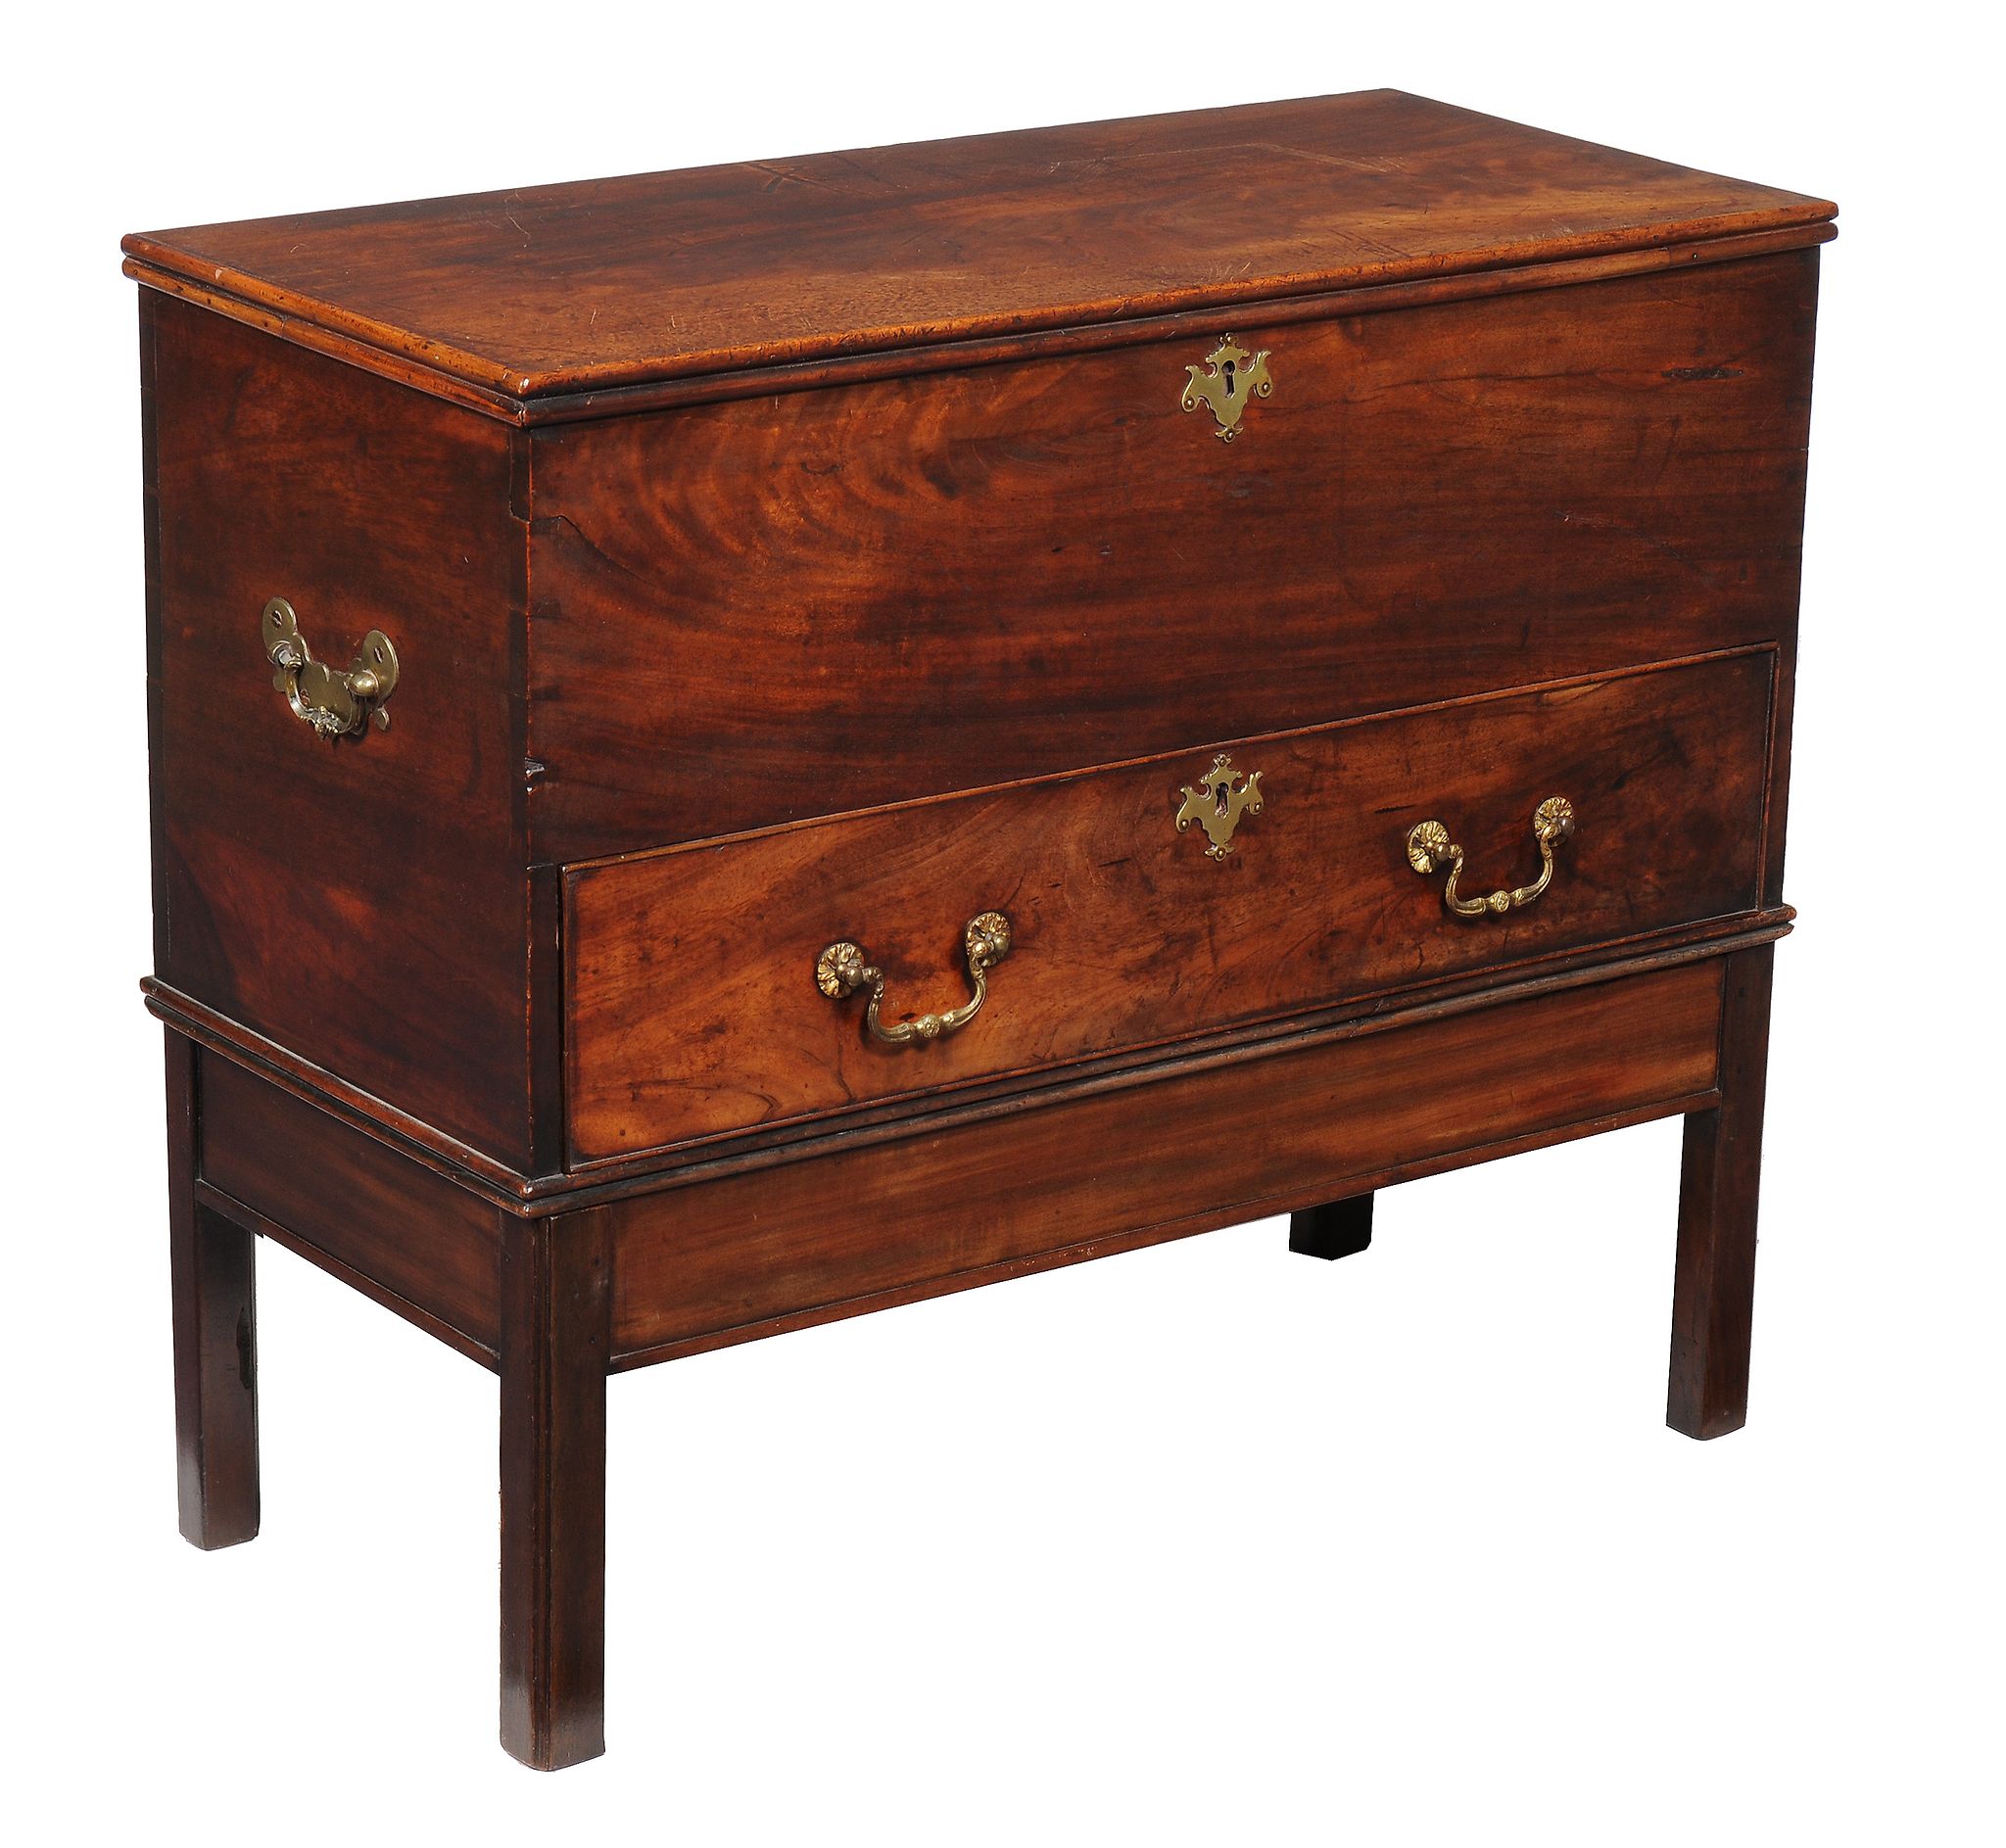 A mahogany coffer on stand, circa 1780 and later, 78cm high overall, 90cm wide, 41cm deep